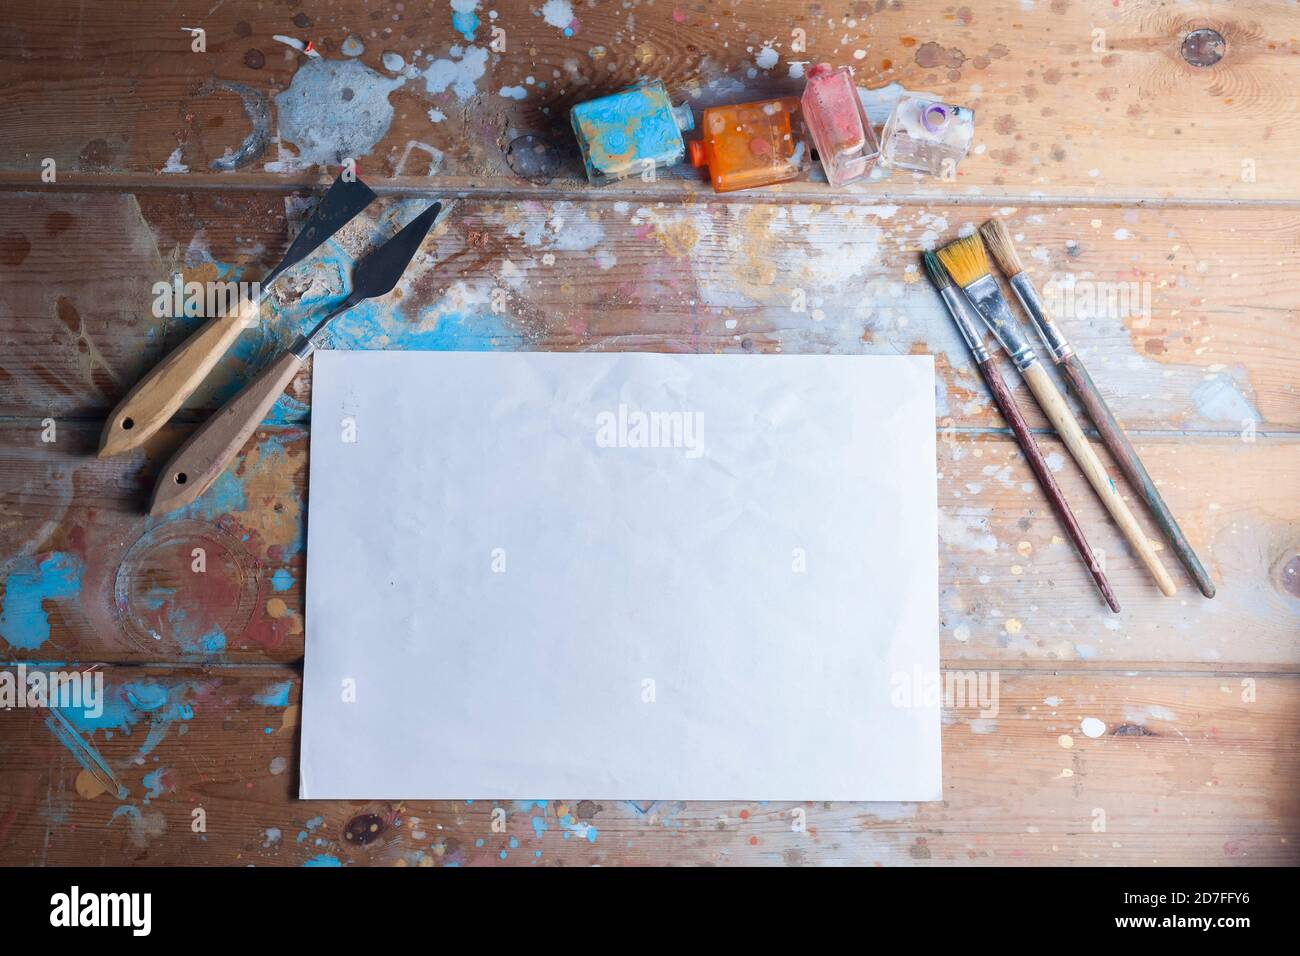 Artists desk and materials mockup.Various brushes and pallete knives.The image contains one blank white sheet of paper ideal for a creative mockup. Stock Photo